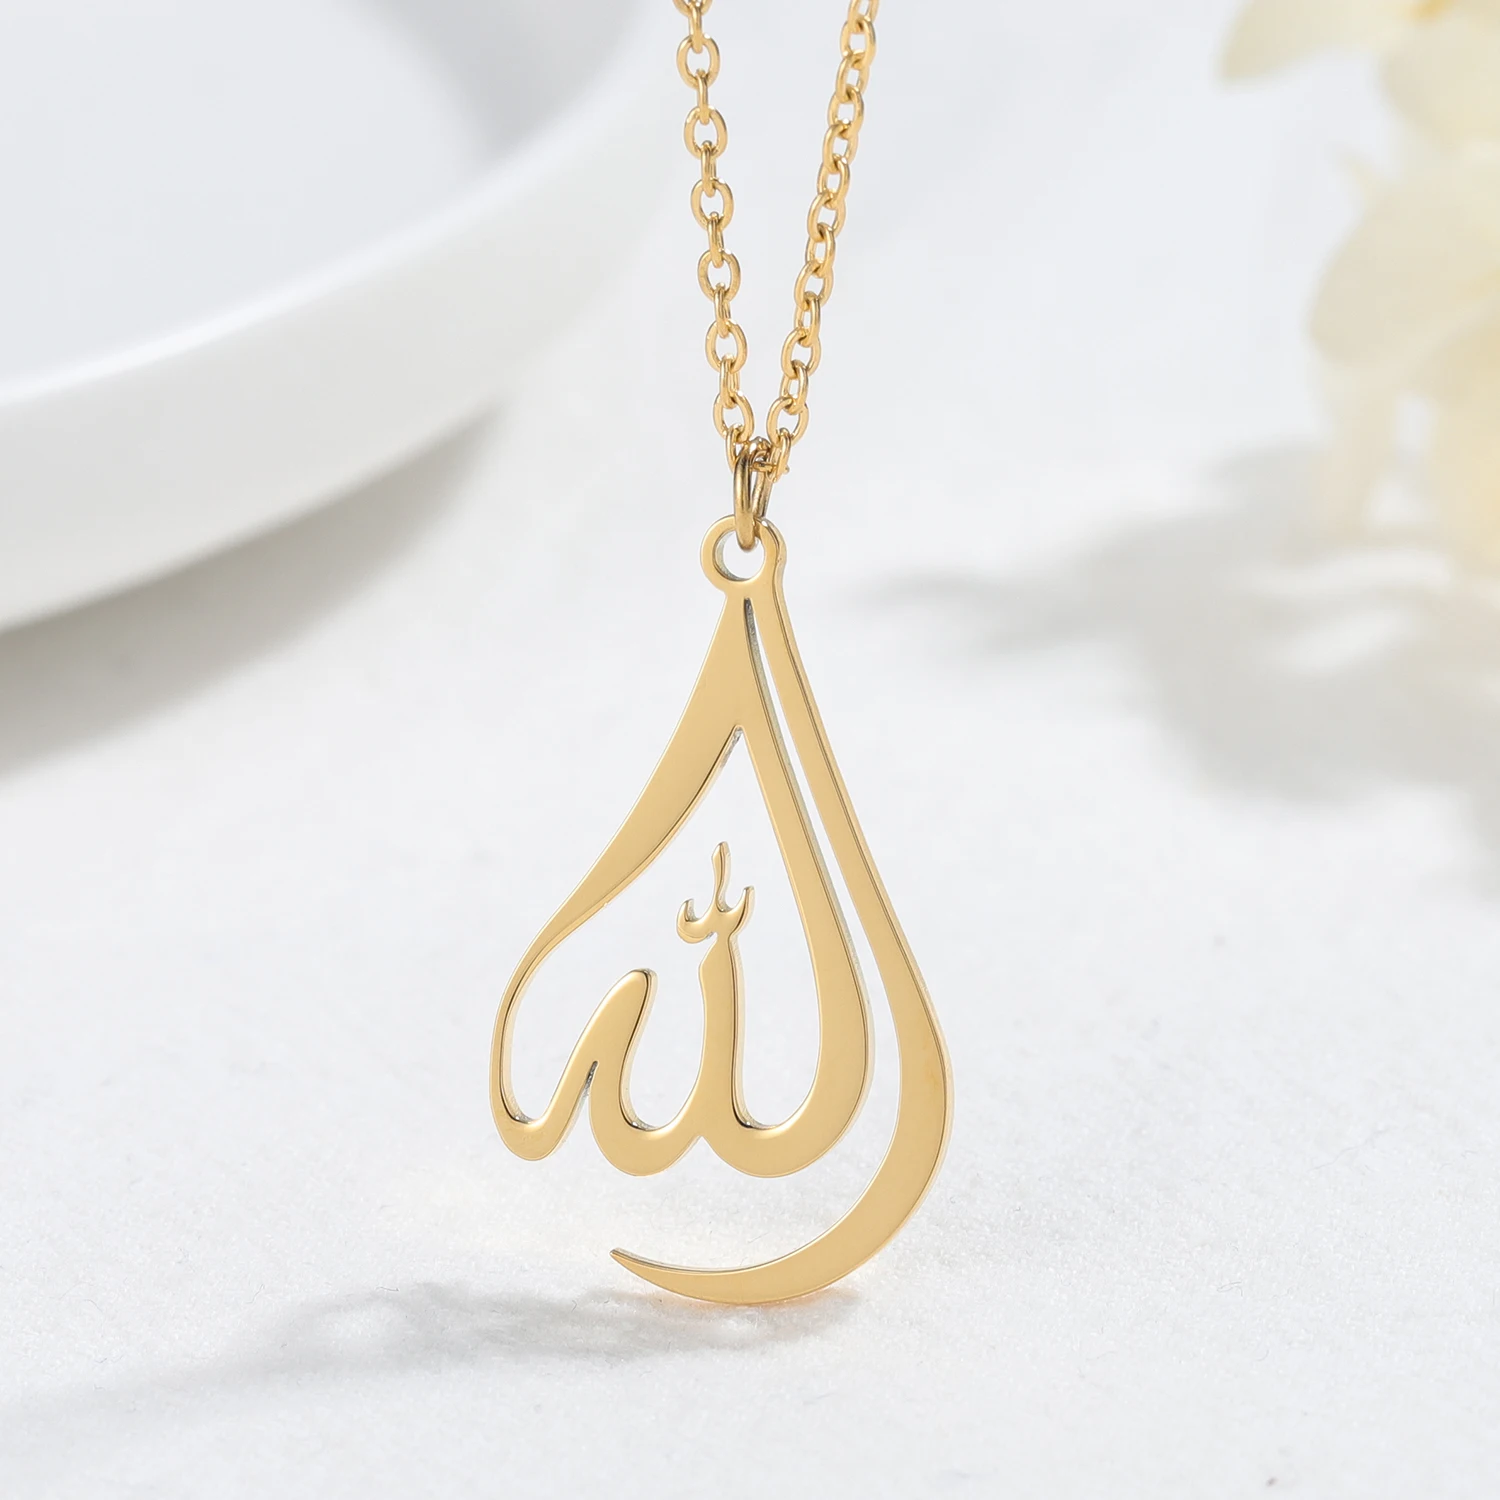 Arabic Allah Calligraphy Name Necklace High Quality Metal Pendant Necklace Islam Muslim God Messager Jewelry For women Gifts